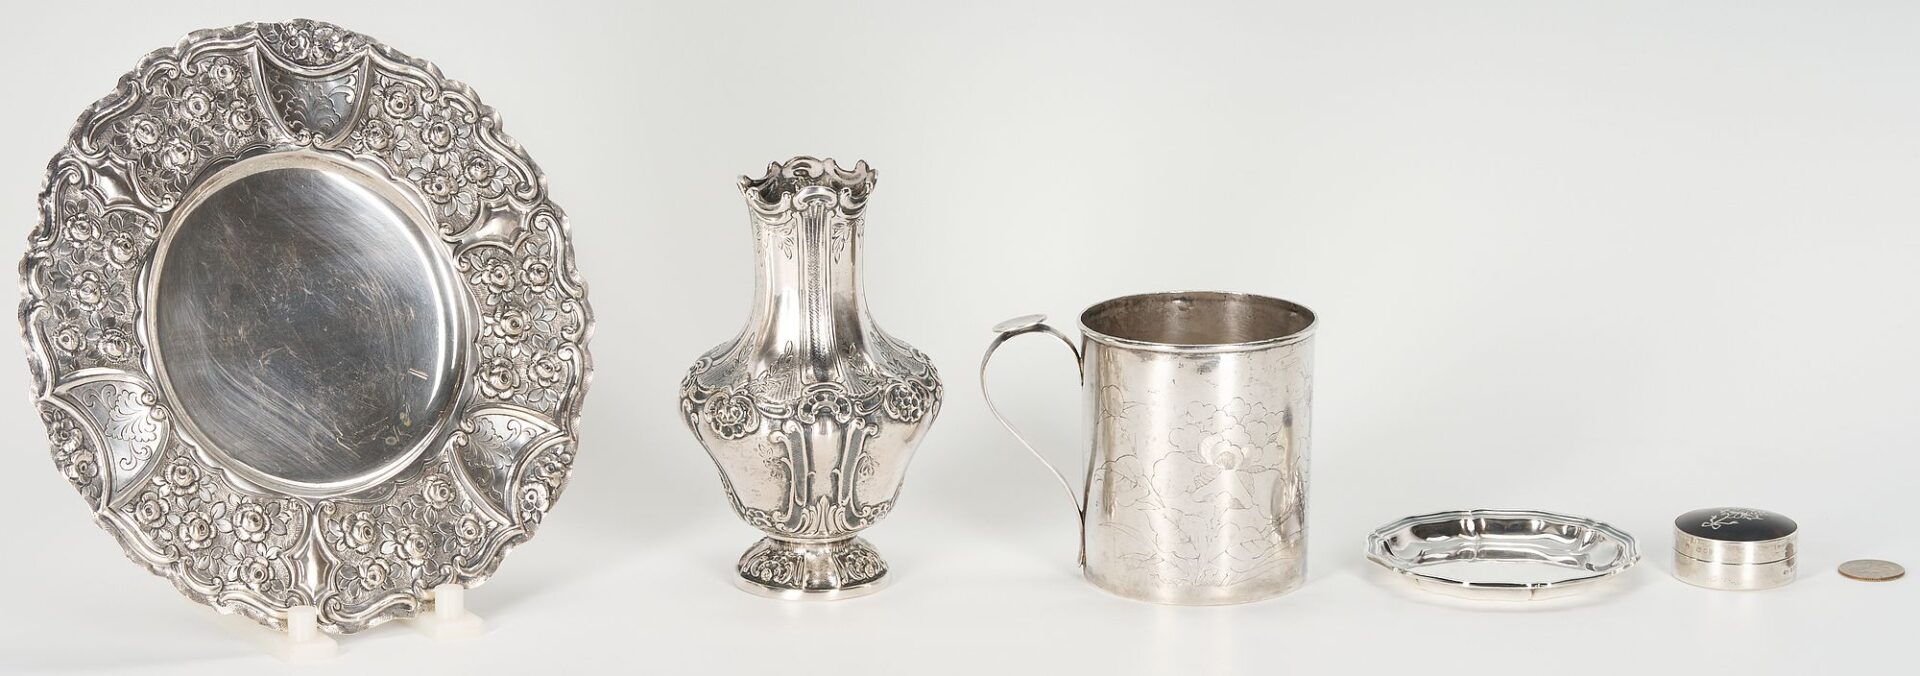 Lot 291: 5 Silver Items: Chinese and Continental